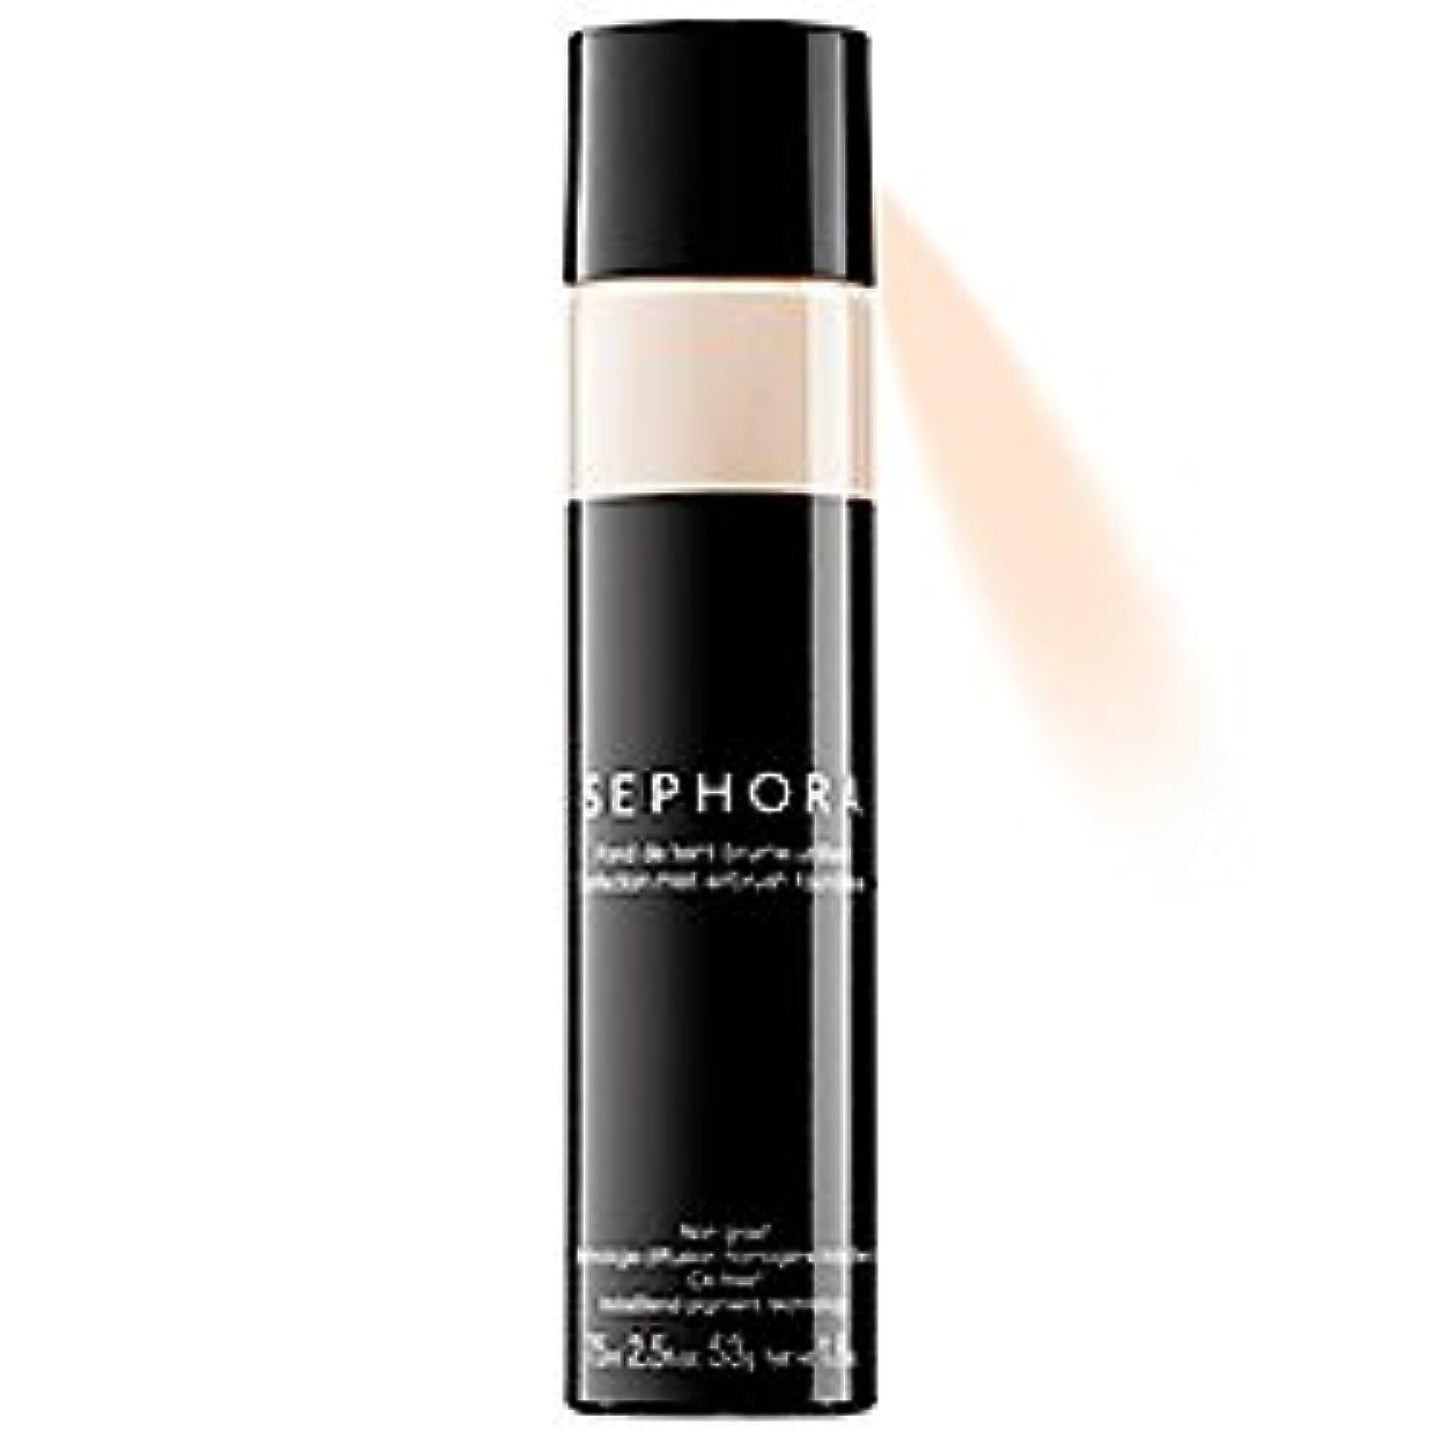 Sephora Collection Perfection Mist Airbrush Foundation - Fawn